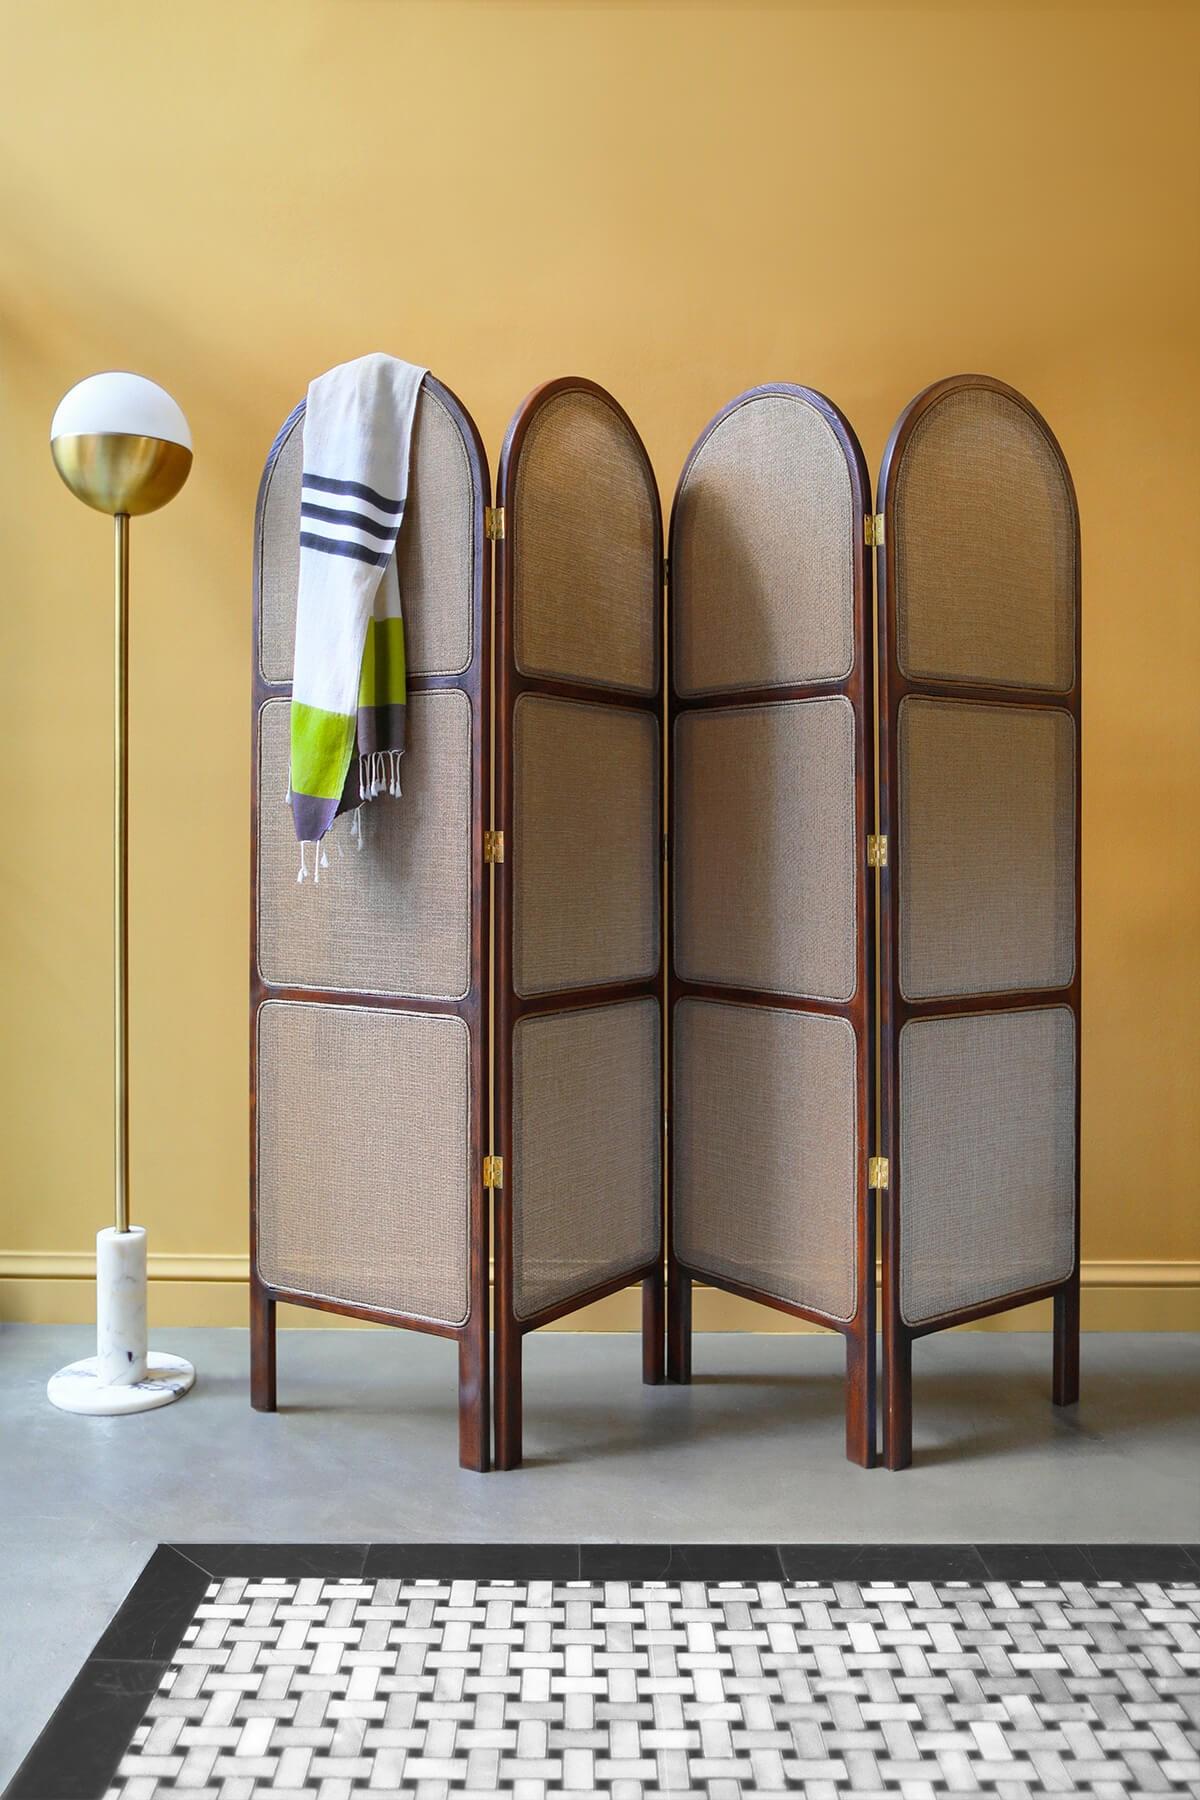 This specially designed elegant folding screen is an ideal choice to add natural charm and functionality to your home or office space. With its four-panel design, it creates a separate area or provides privacy while also serving as a decorative